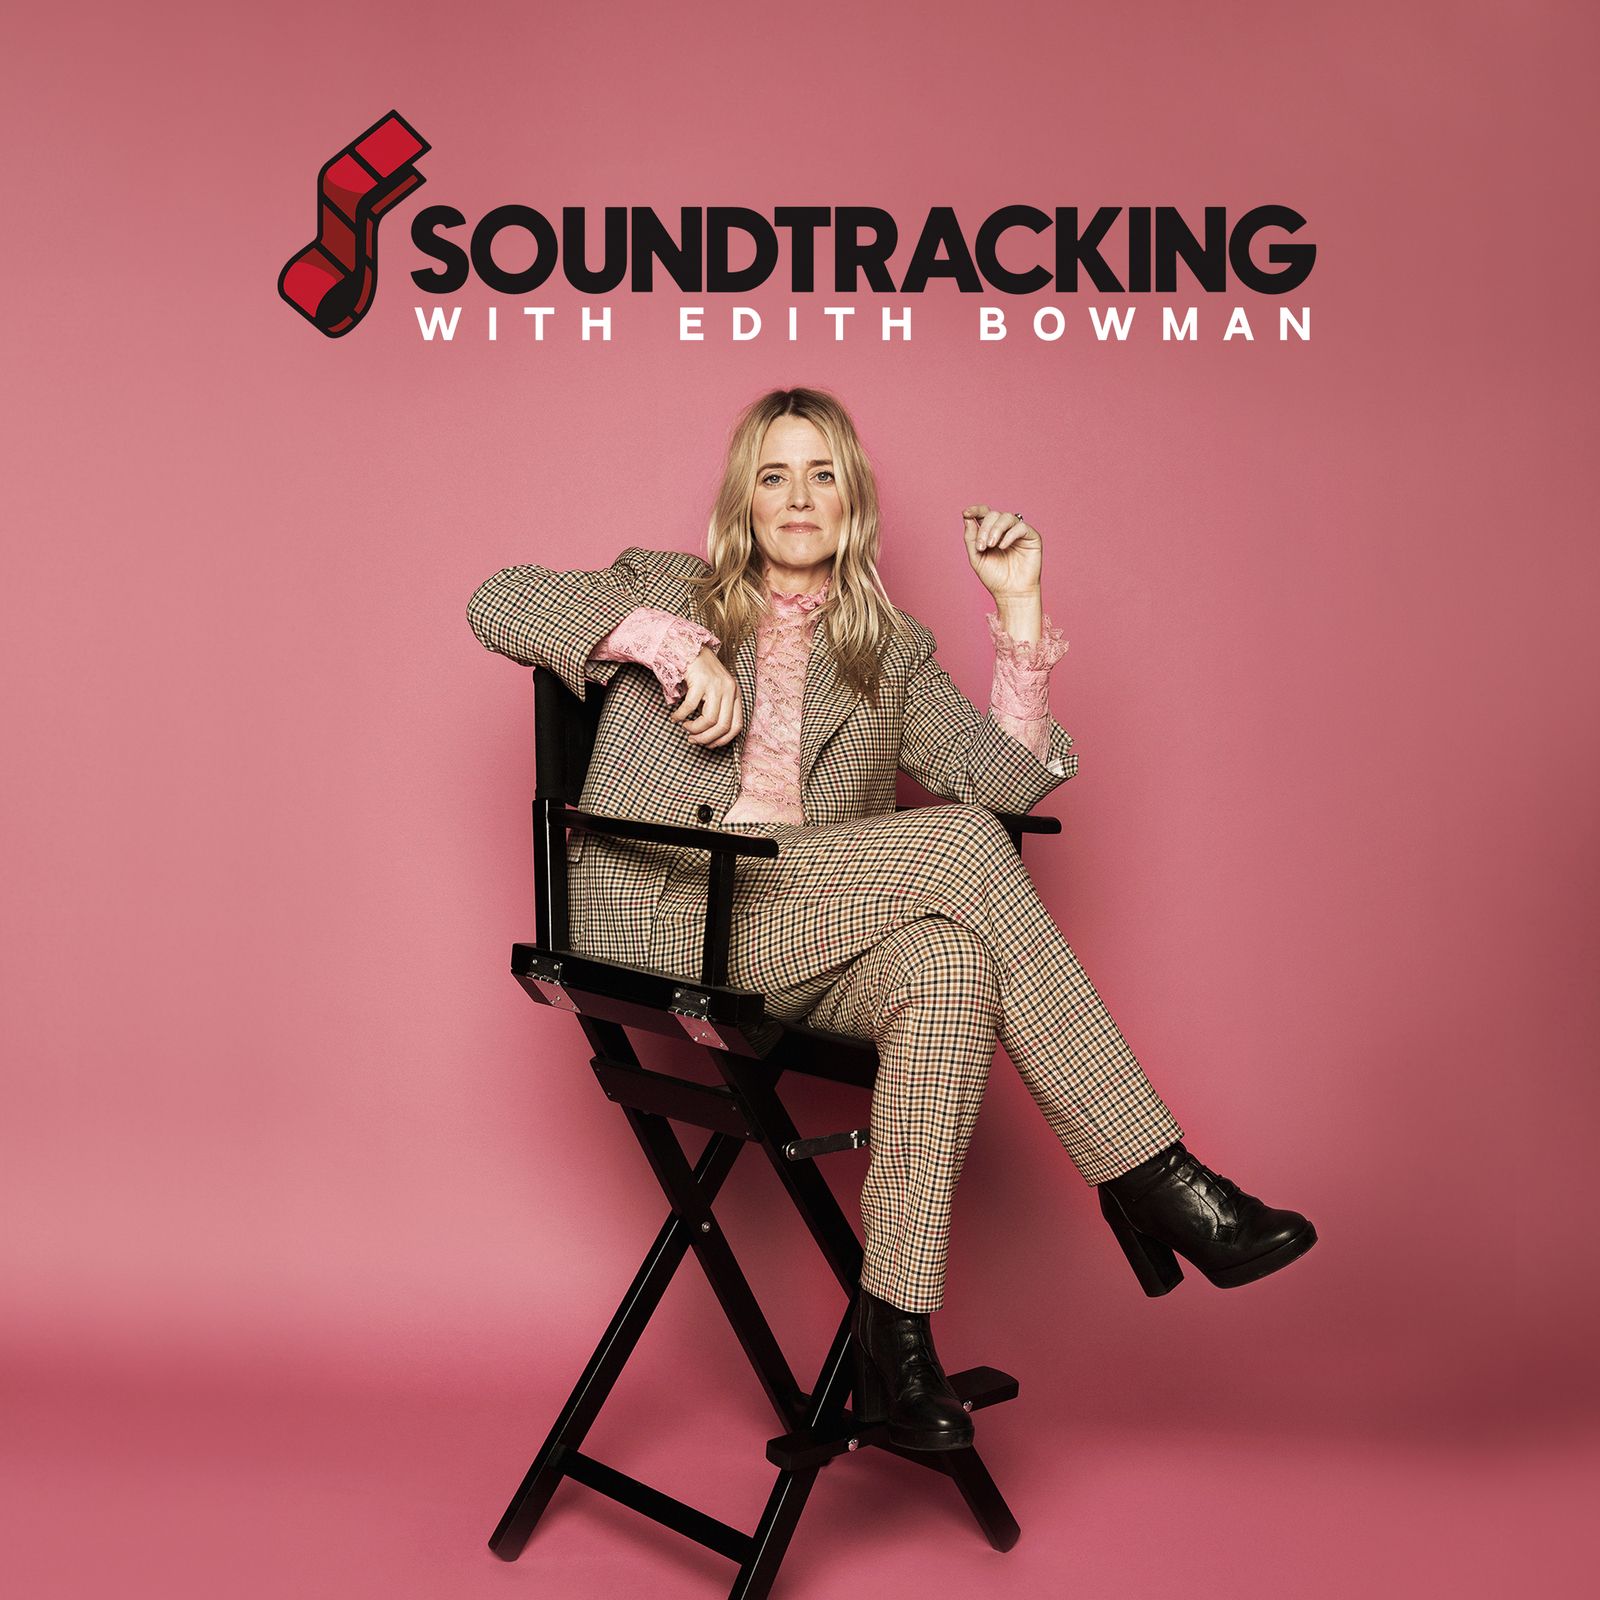 Soundtracking with Edith Bowman podcast